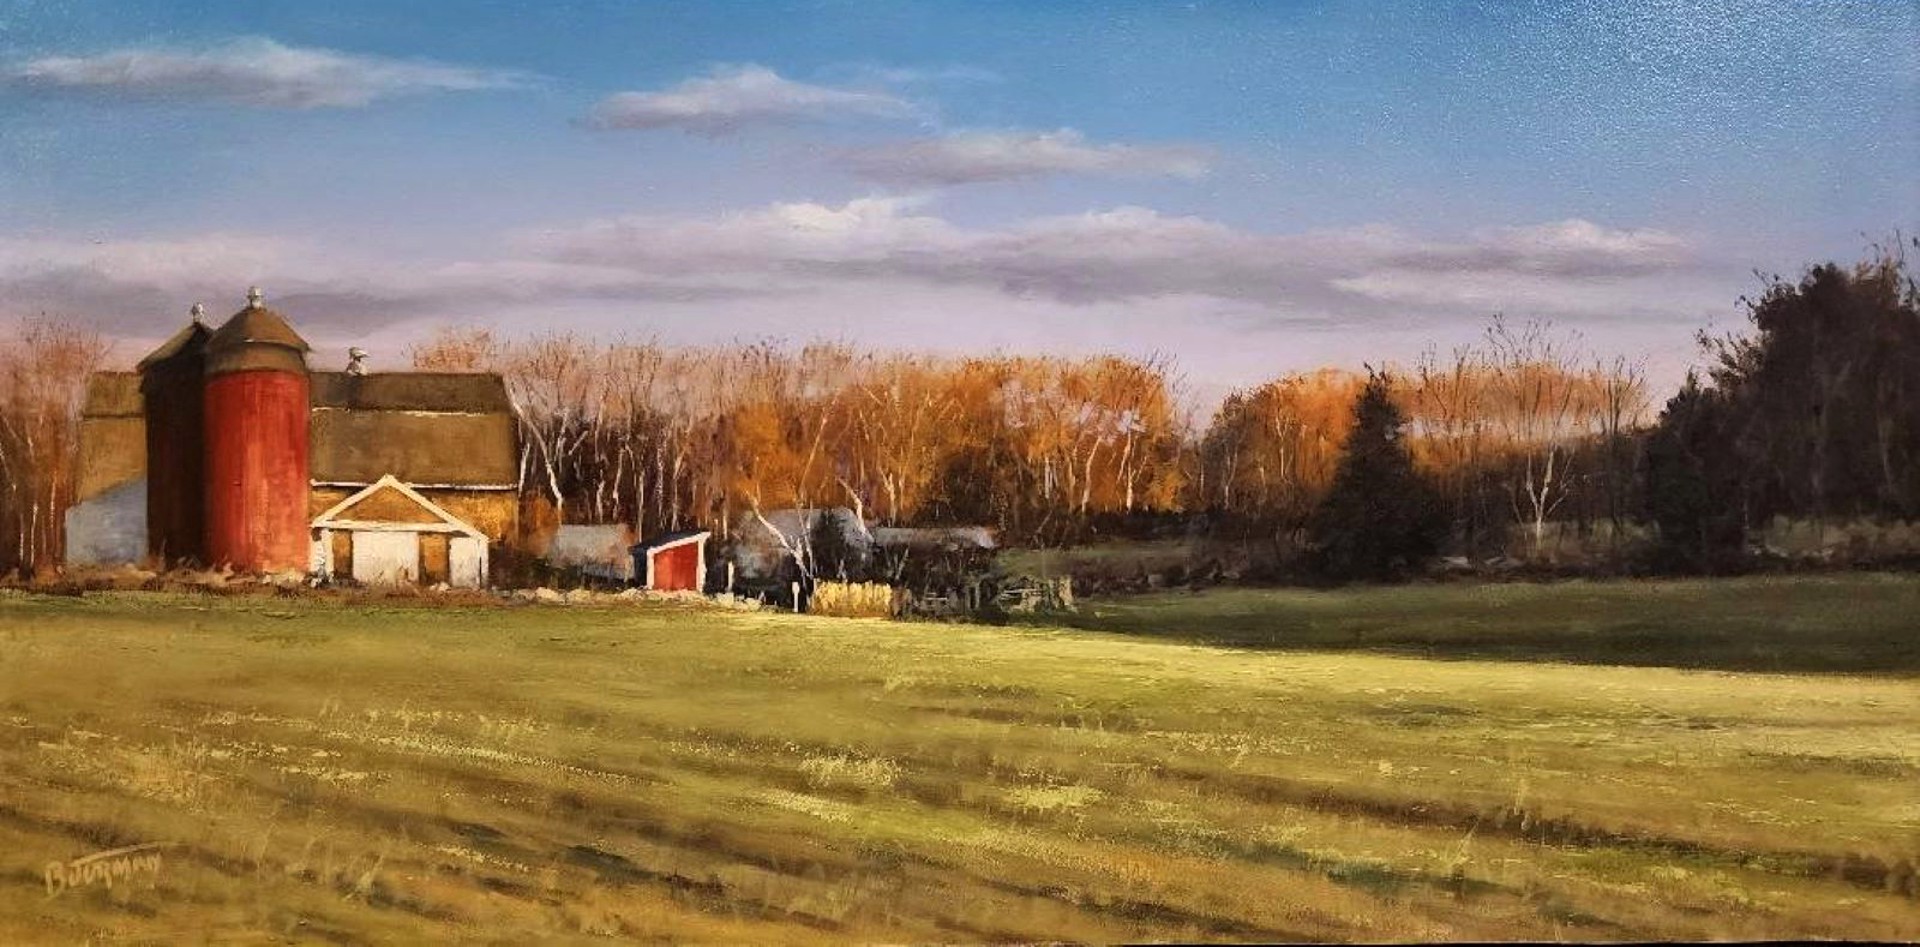 Johan P. Bjurman "Late Fall Afternoon" by Oil Painters of America